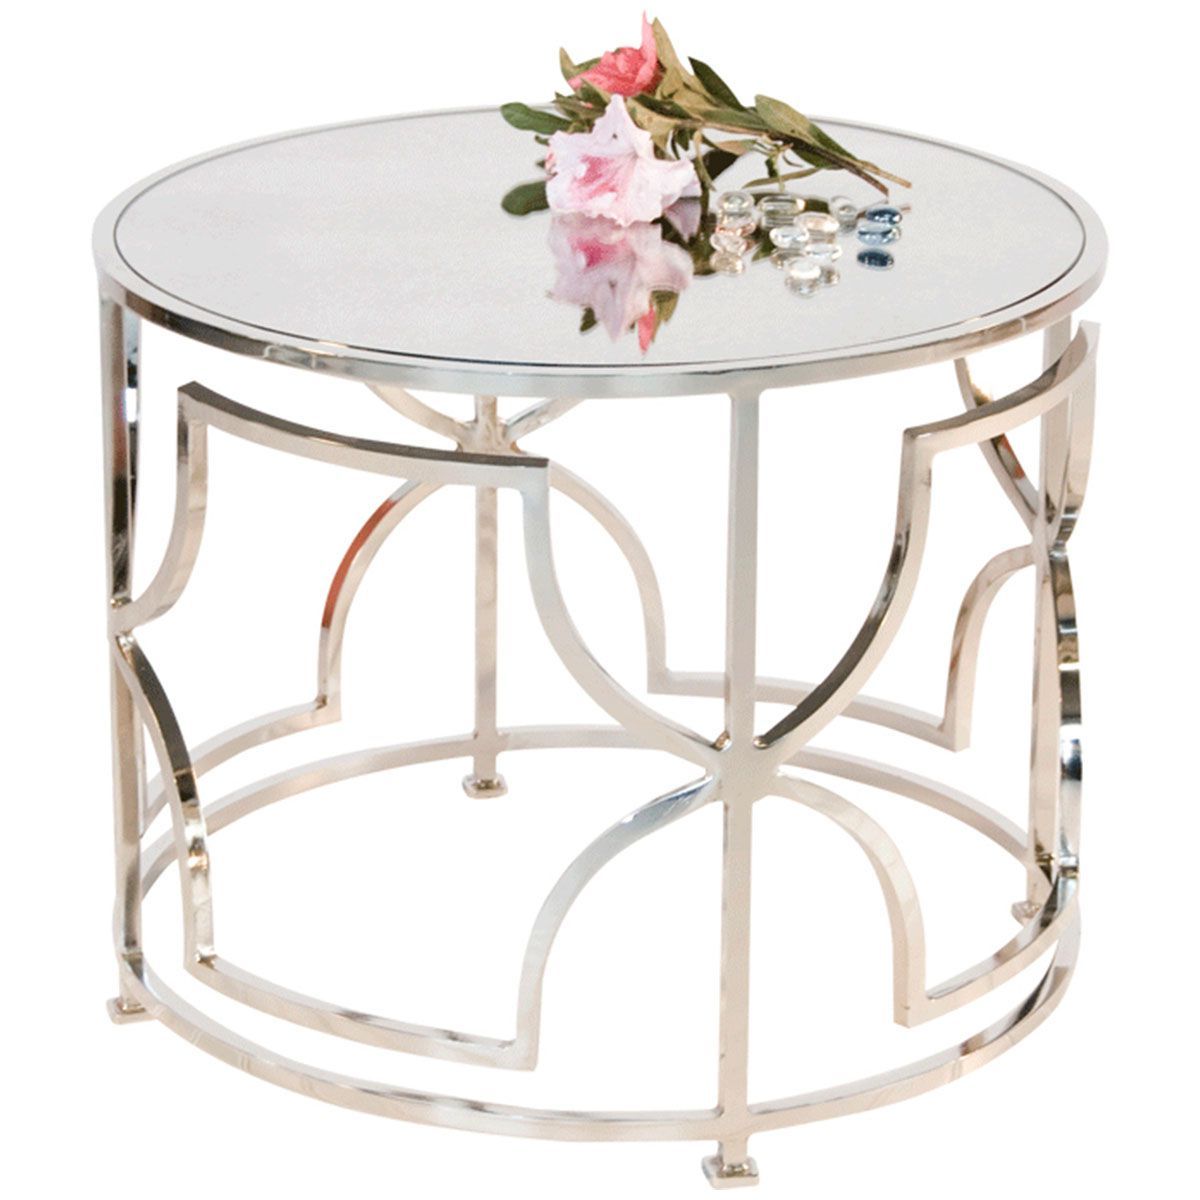 Widely Used Worlds Away Nickel Plated Round Cocktail Table With Antique Mirror Top Inside Mirrored Cocktail Tables (View 9 of 10)